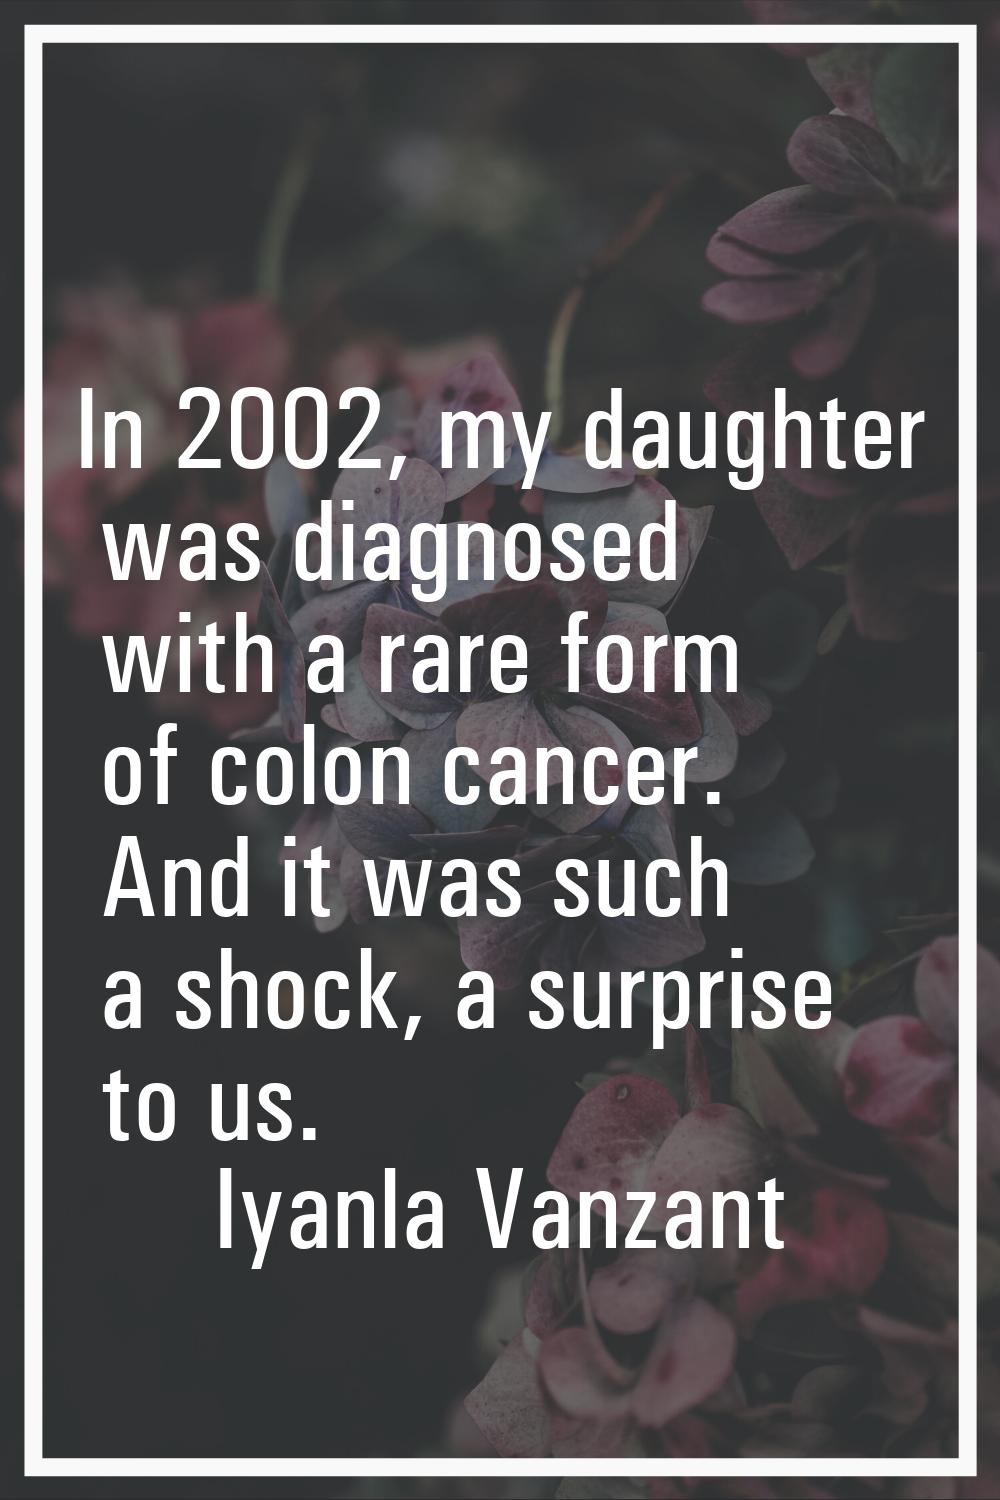 In 2002, my daughter was diagnosed with a rare form of colon cancer. And it was such a shock, a sur